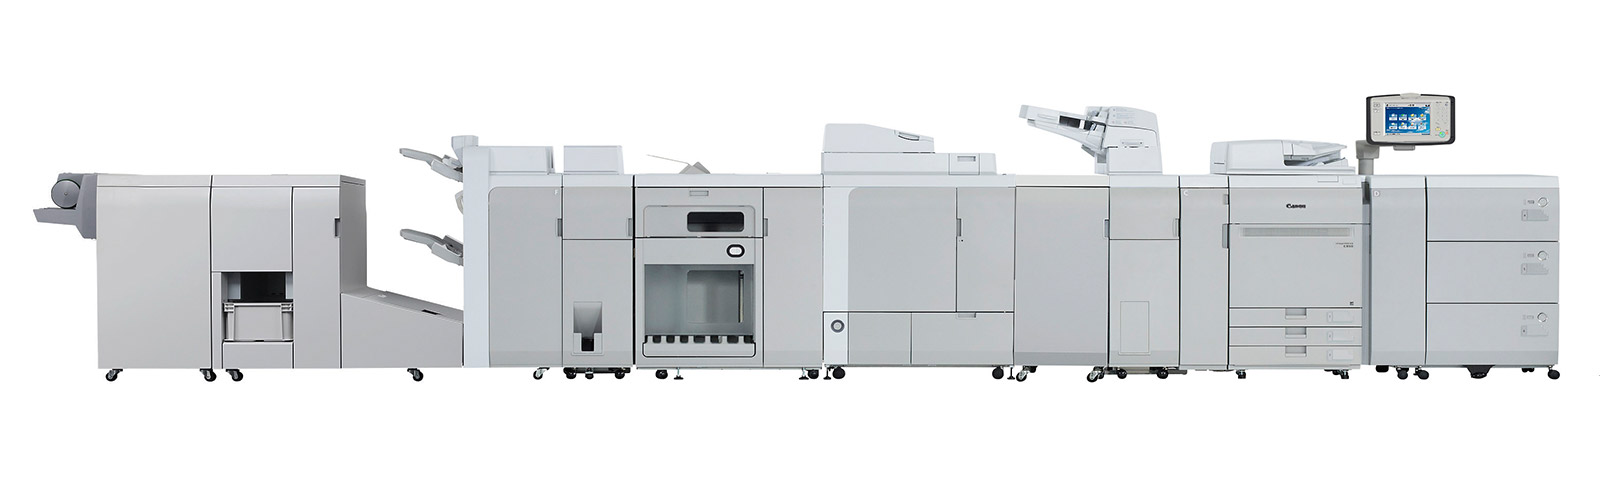 Canon imagePRESS C910 Production Print System